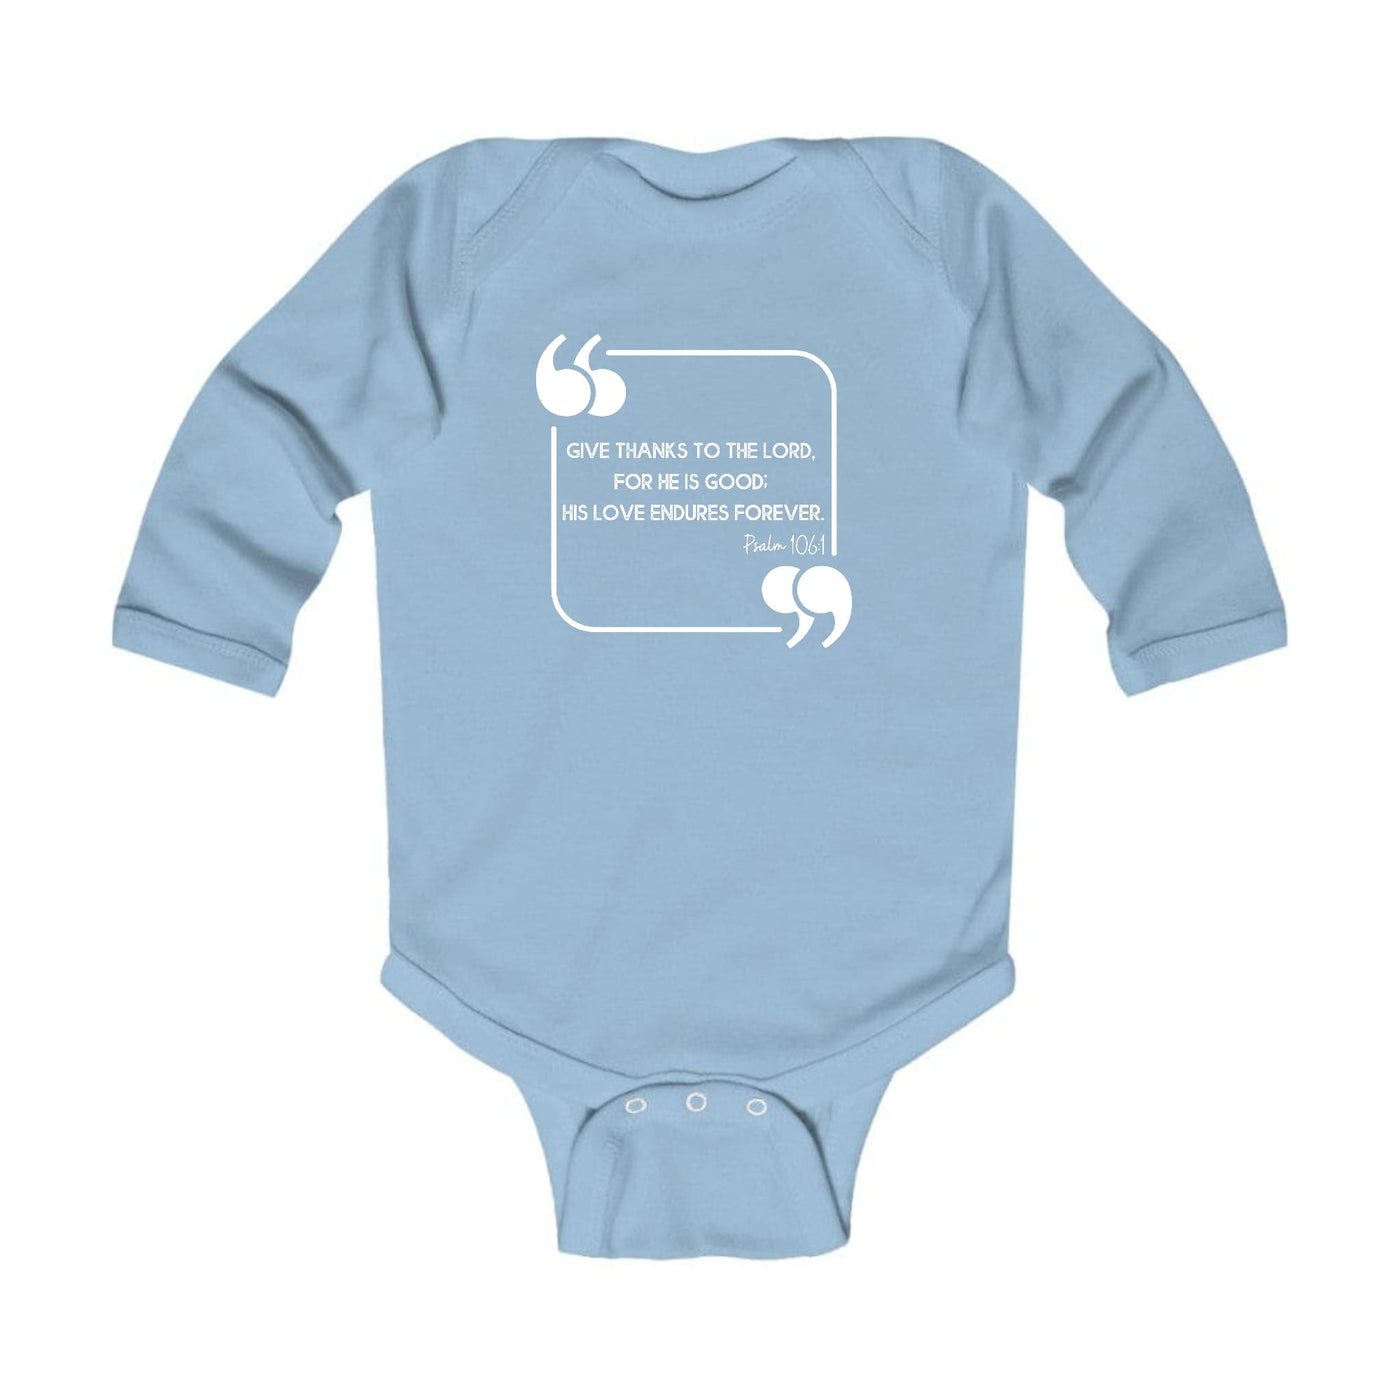 Infant Long Sleeve Graphic T-shirt Give Thanks To The Lord - Childrens | Infant